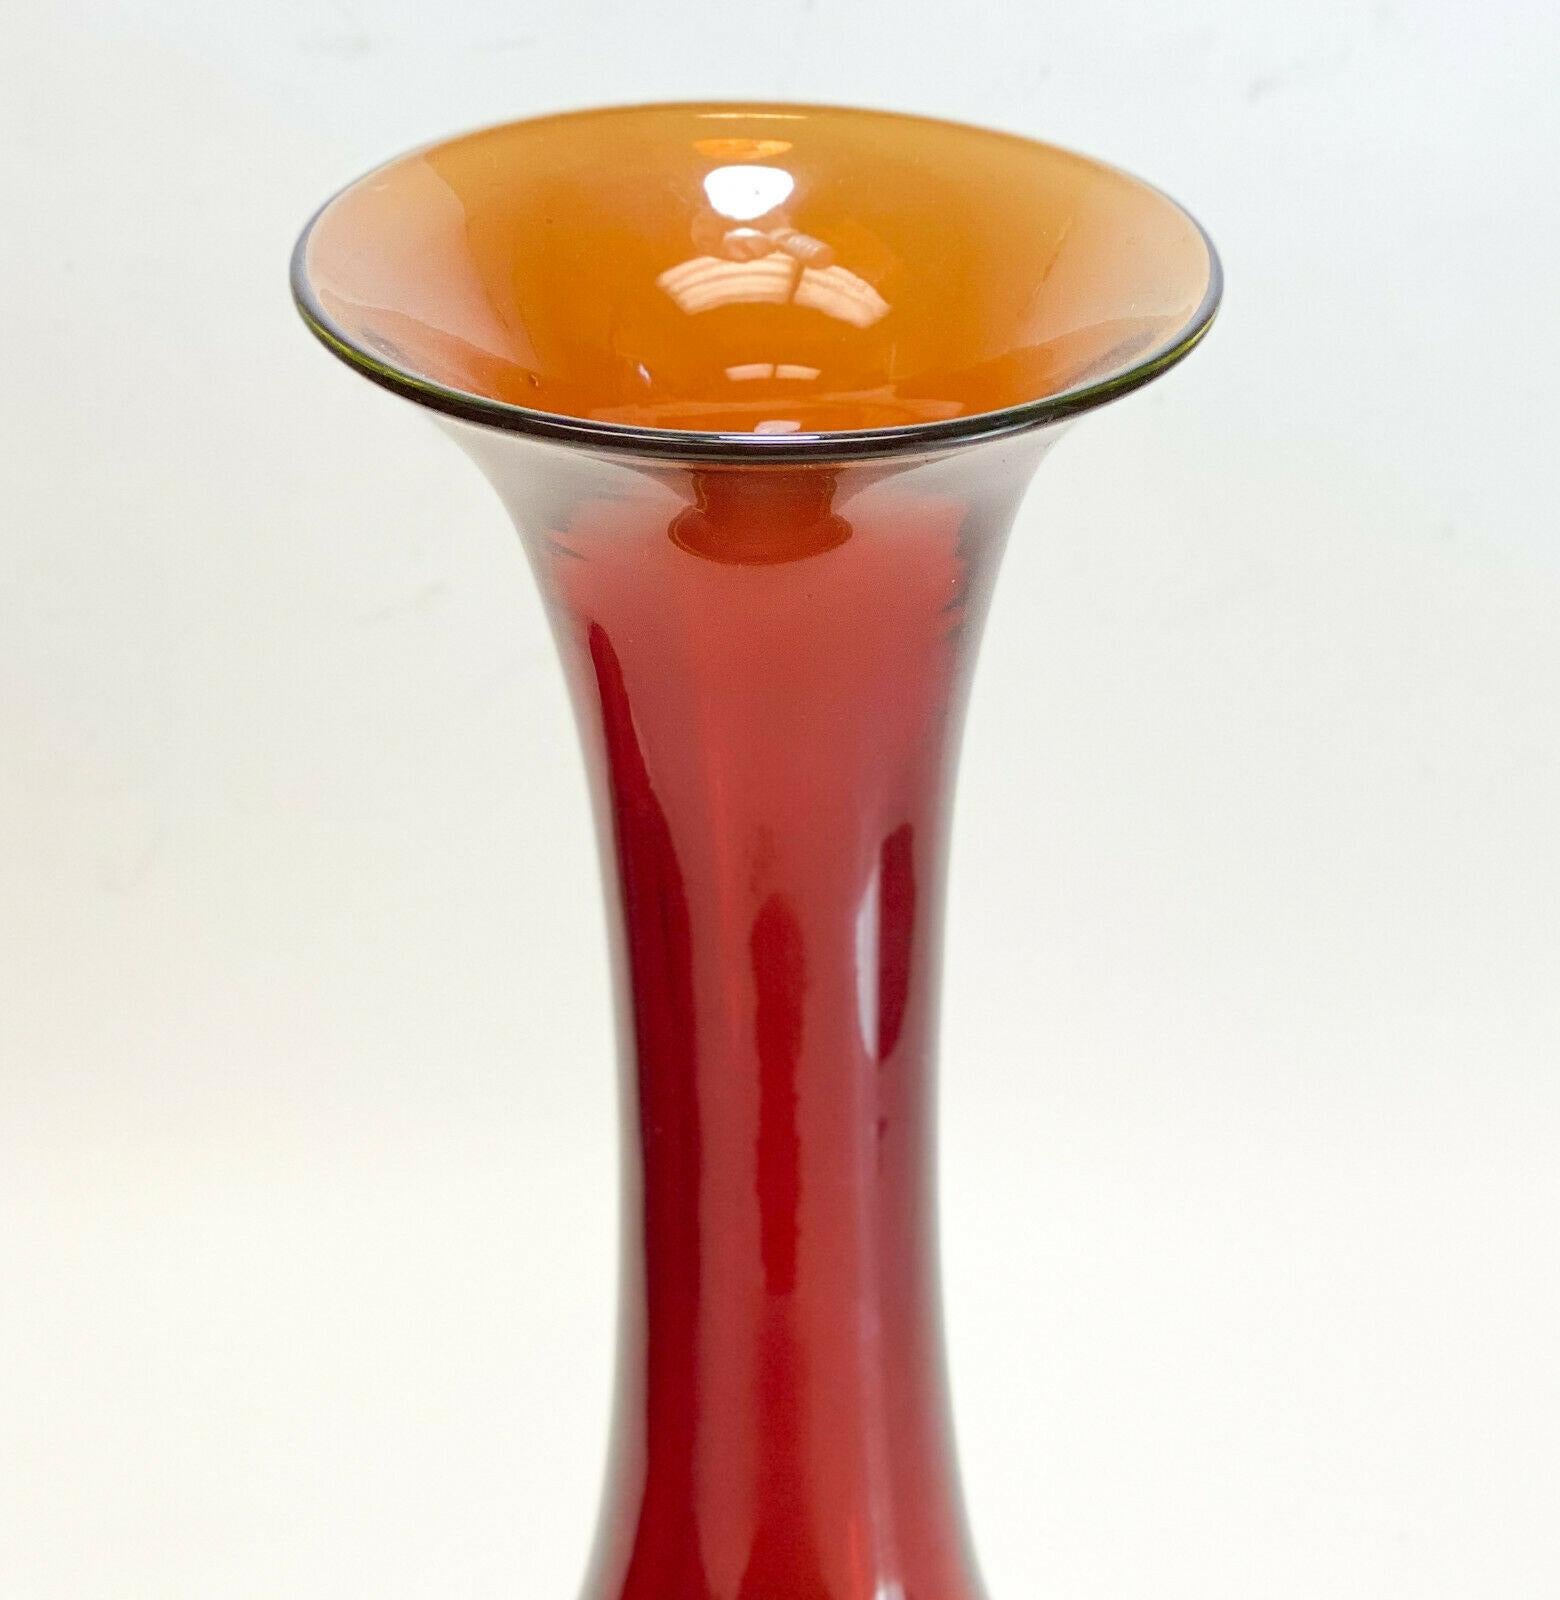 Murano Art glass Carolla vase by Antonio da Ros sommerso for Vetreria Gino Cenedese, 1964. Multicolored with red along the stem and lime green to the base. The original paper label no longer accompanies the vase.

Weight approximate, 12